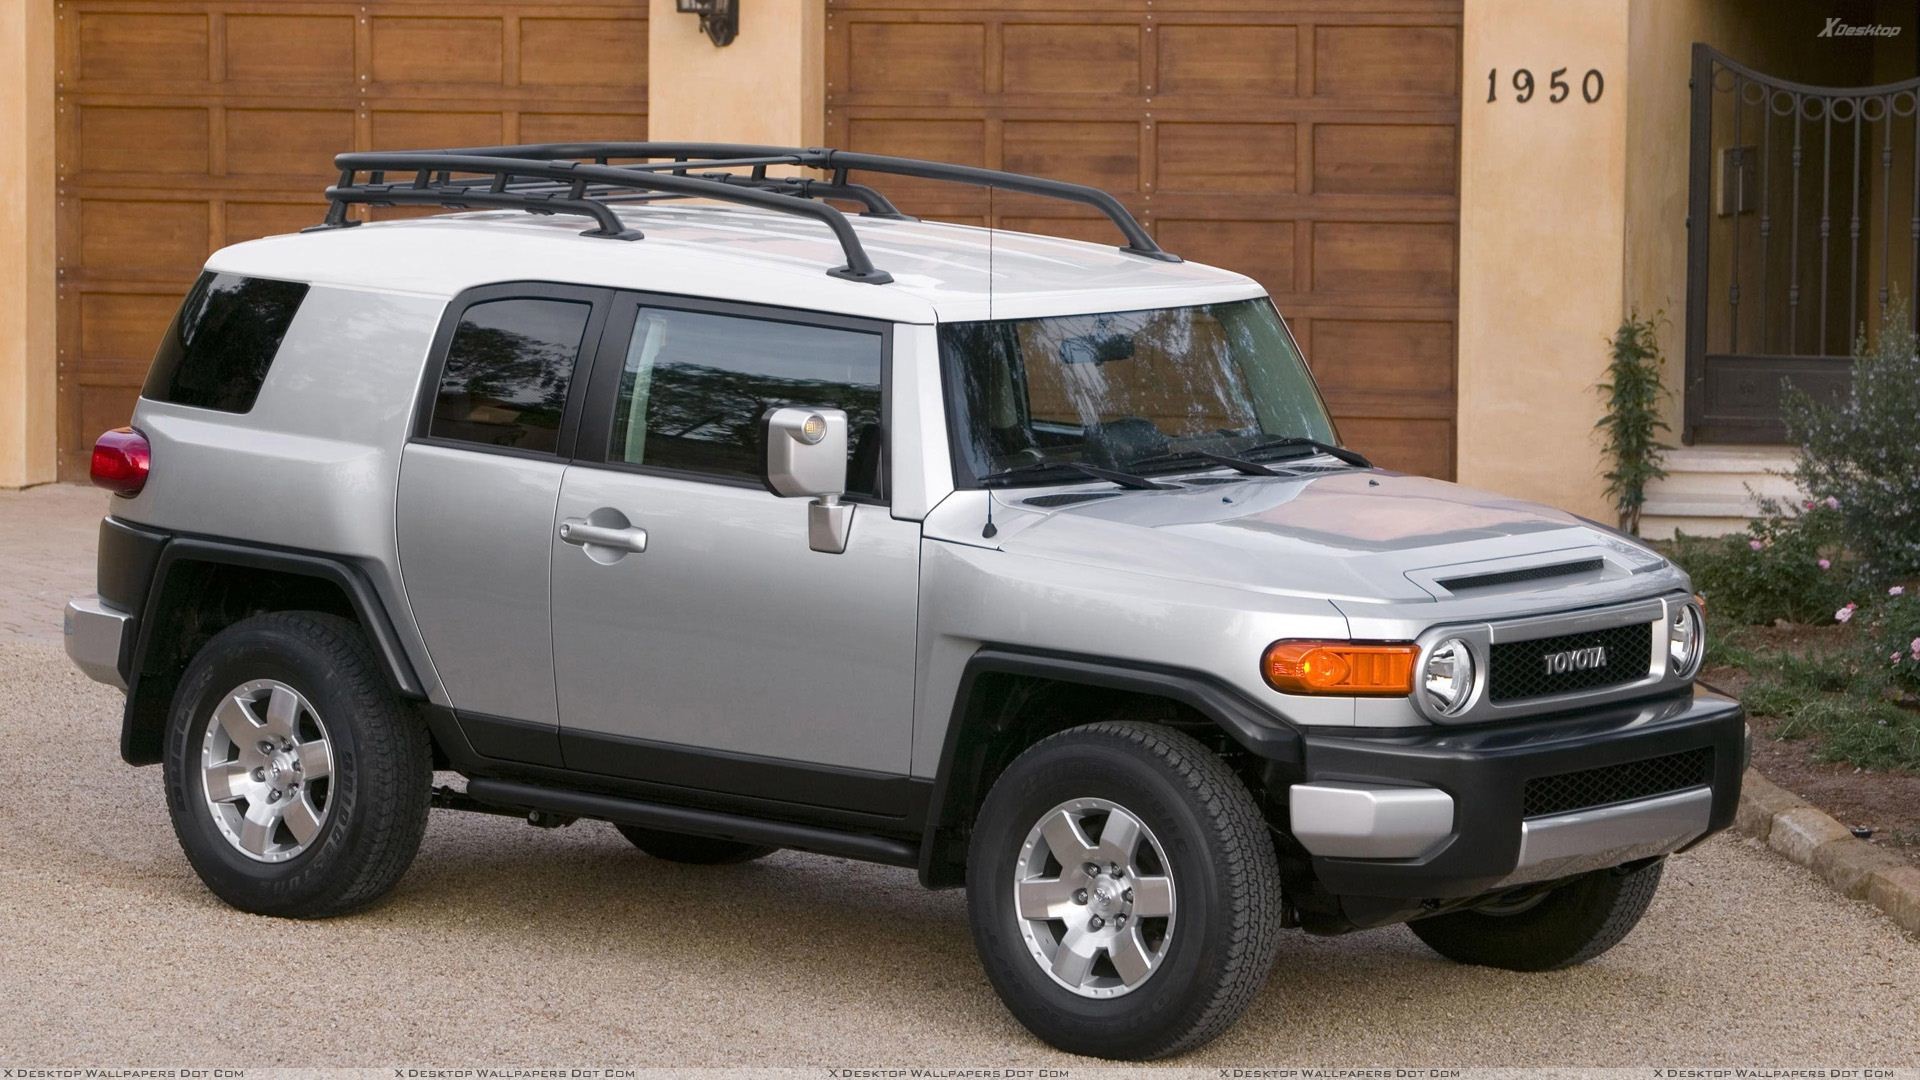 1920x1080 You are viewing wallpaper titled "2008 Toyota FJ Cruiser ...